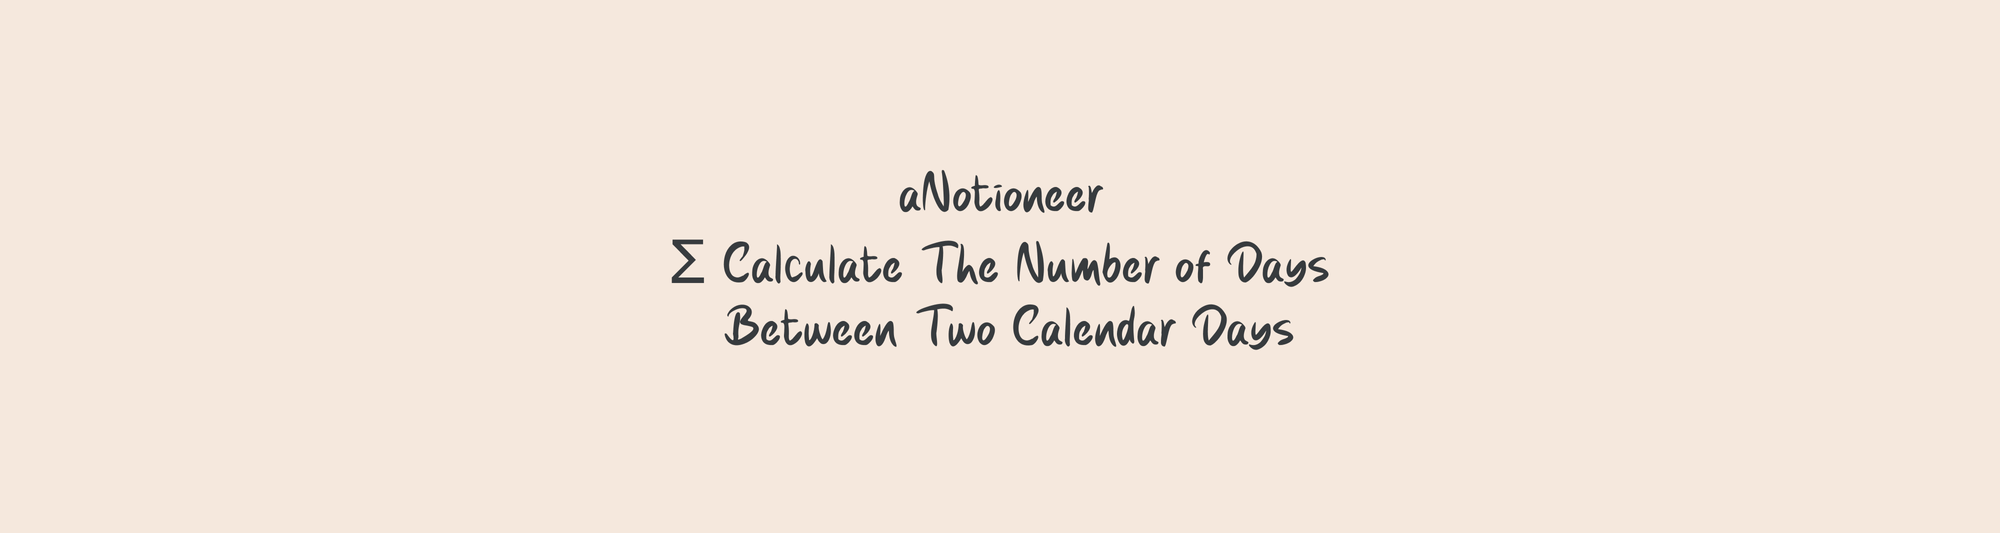 Calculate the Number of Days Between Two Calendar Days Notion Guide